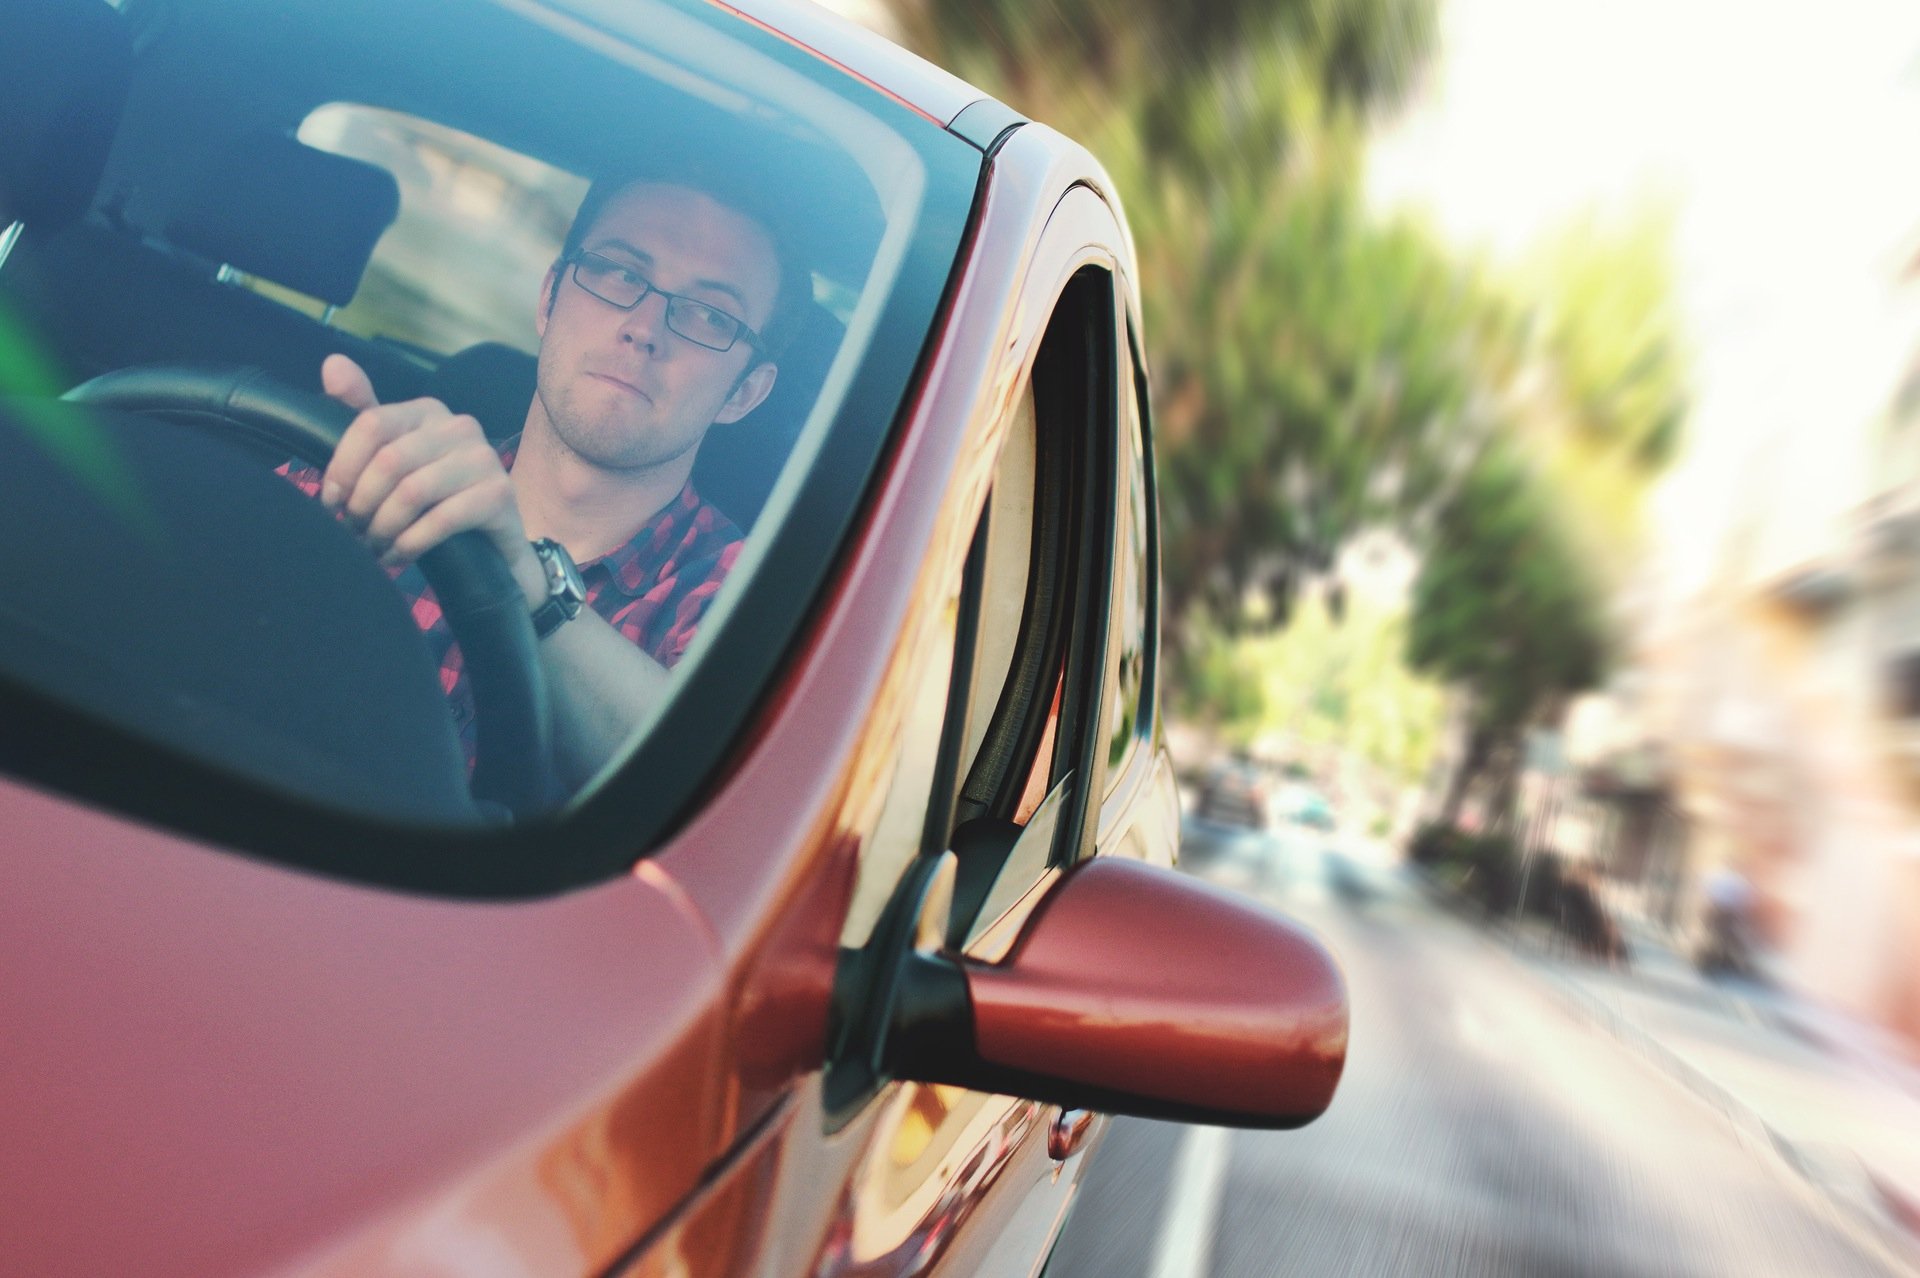 Do you have to buy car insurance if you only drive occasionally?